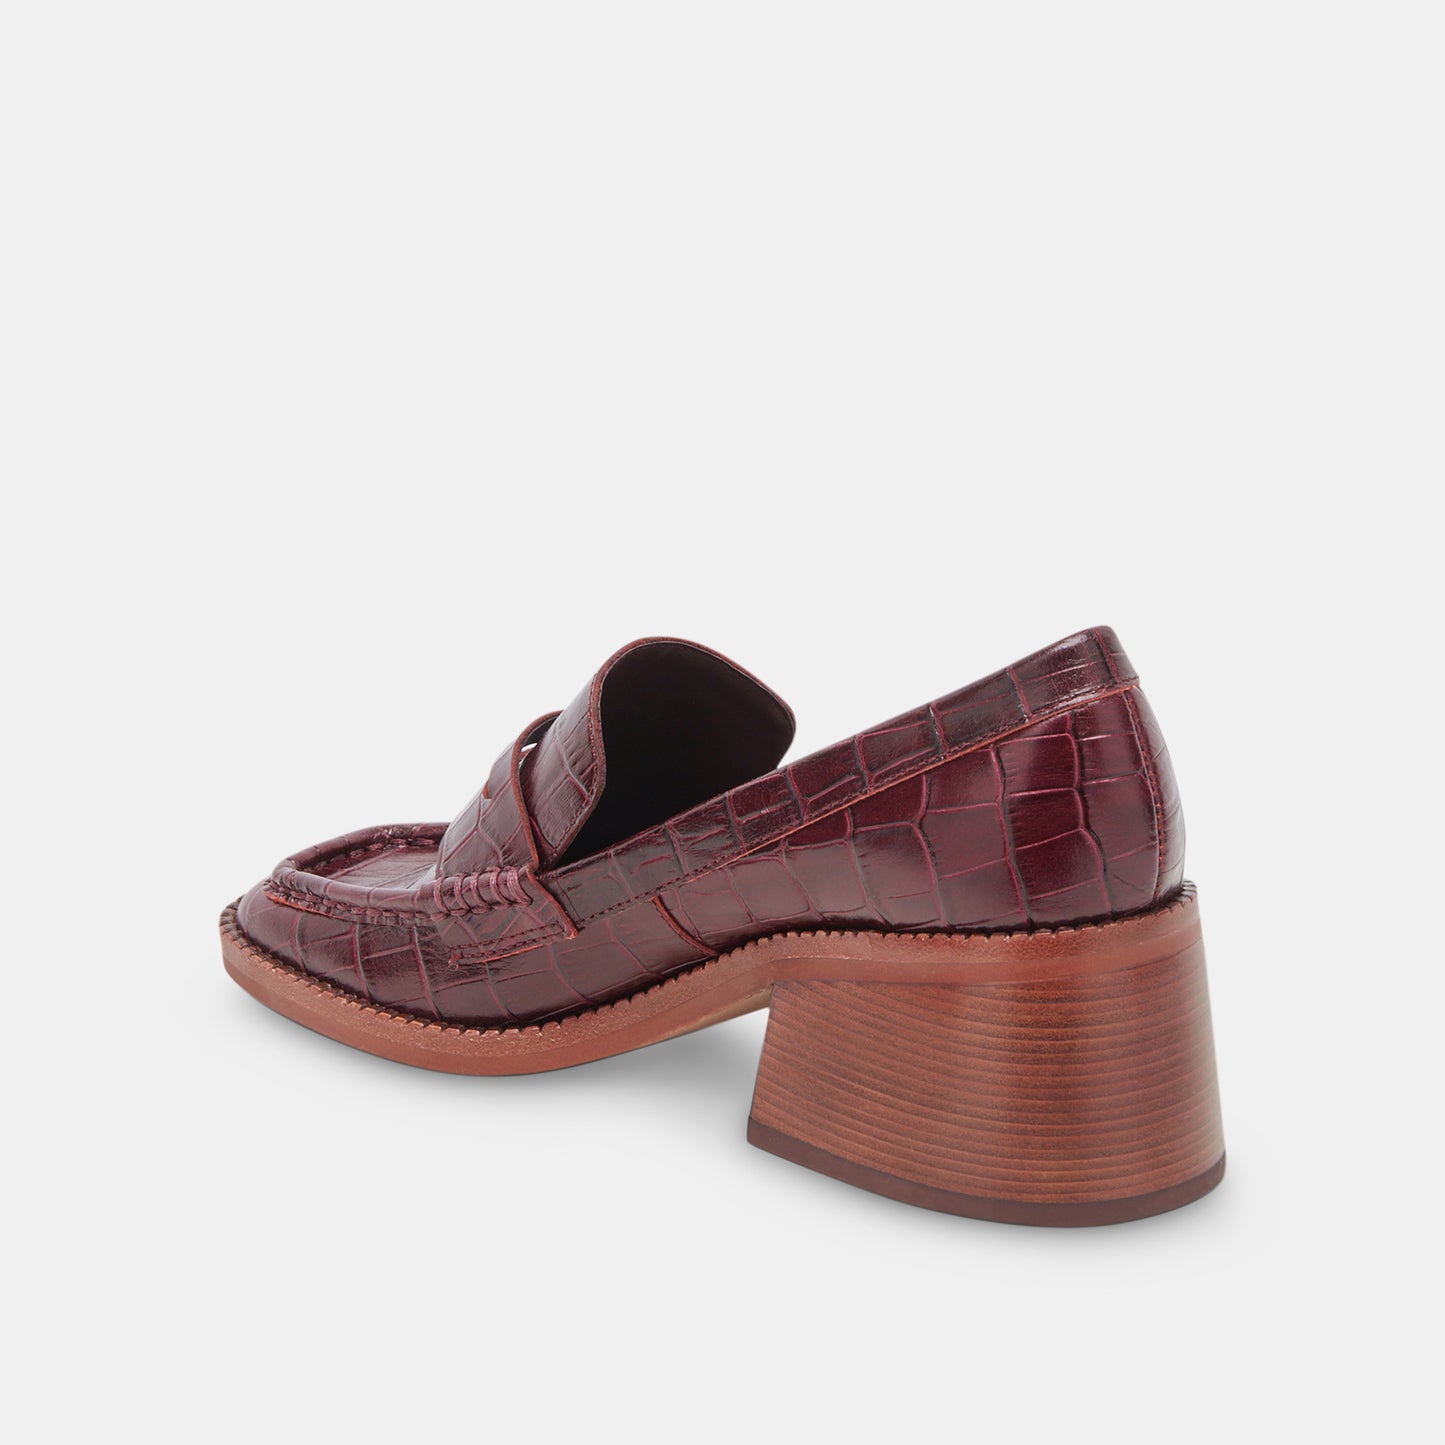 TALIE LOAFERS CABERNET EMBOSSED LEATHER